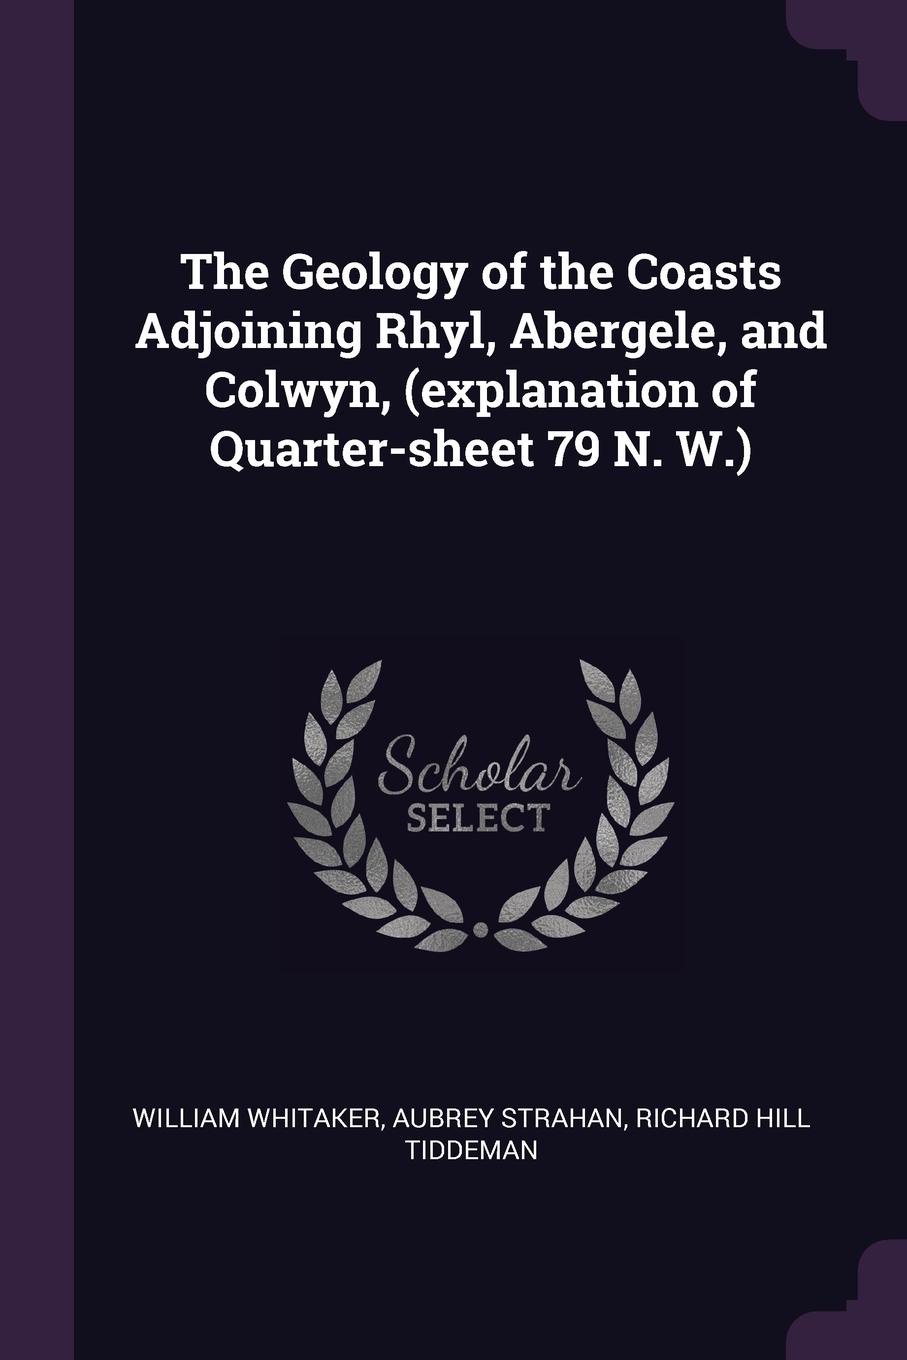 The Geology of the Coasts Adjoining Rhyl, Abergele, and Colwyn, (explanation of Quarter-sheet 79 N. W.)